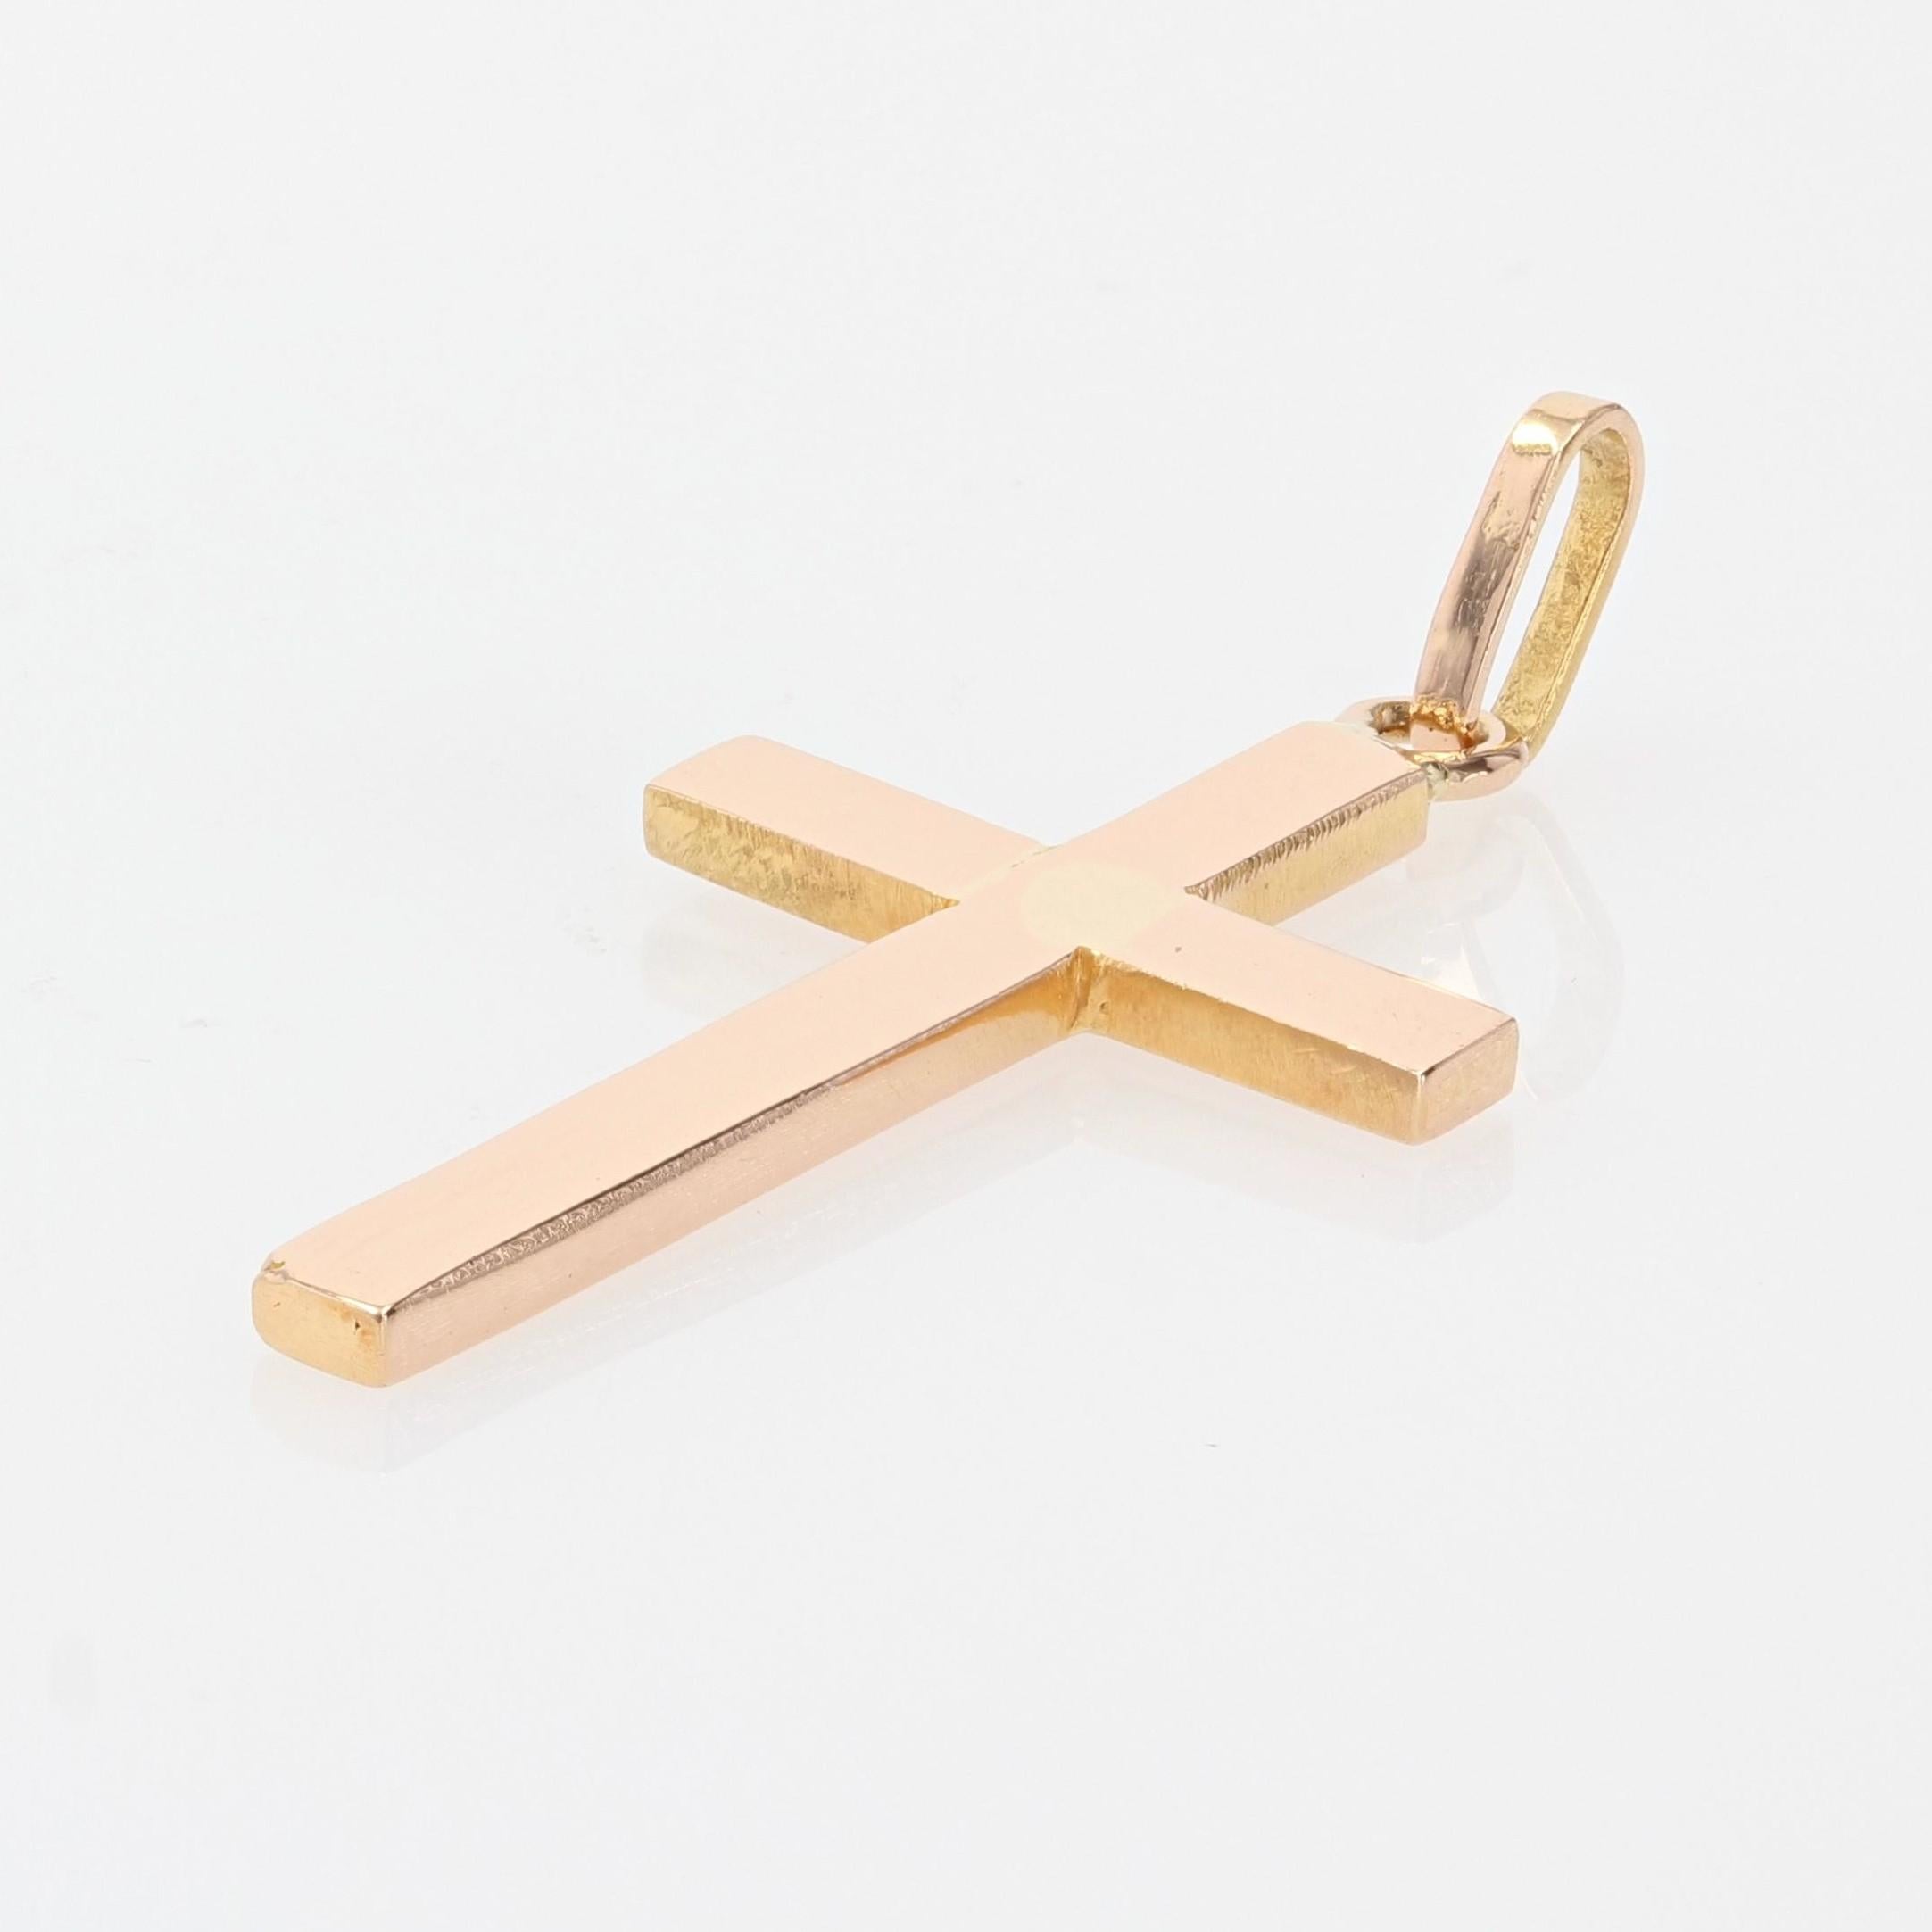 Cross in 18 karat rose gold.
Sober, this rose gold cross is in full and smooth gold.
Pendant sold alone without its chain of presentation.
Height of the cross : 4 cm, width : 2,7 cm, thickness : 1,7 mm approximately.
Total weight of the jewel : 3,9